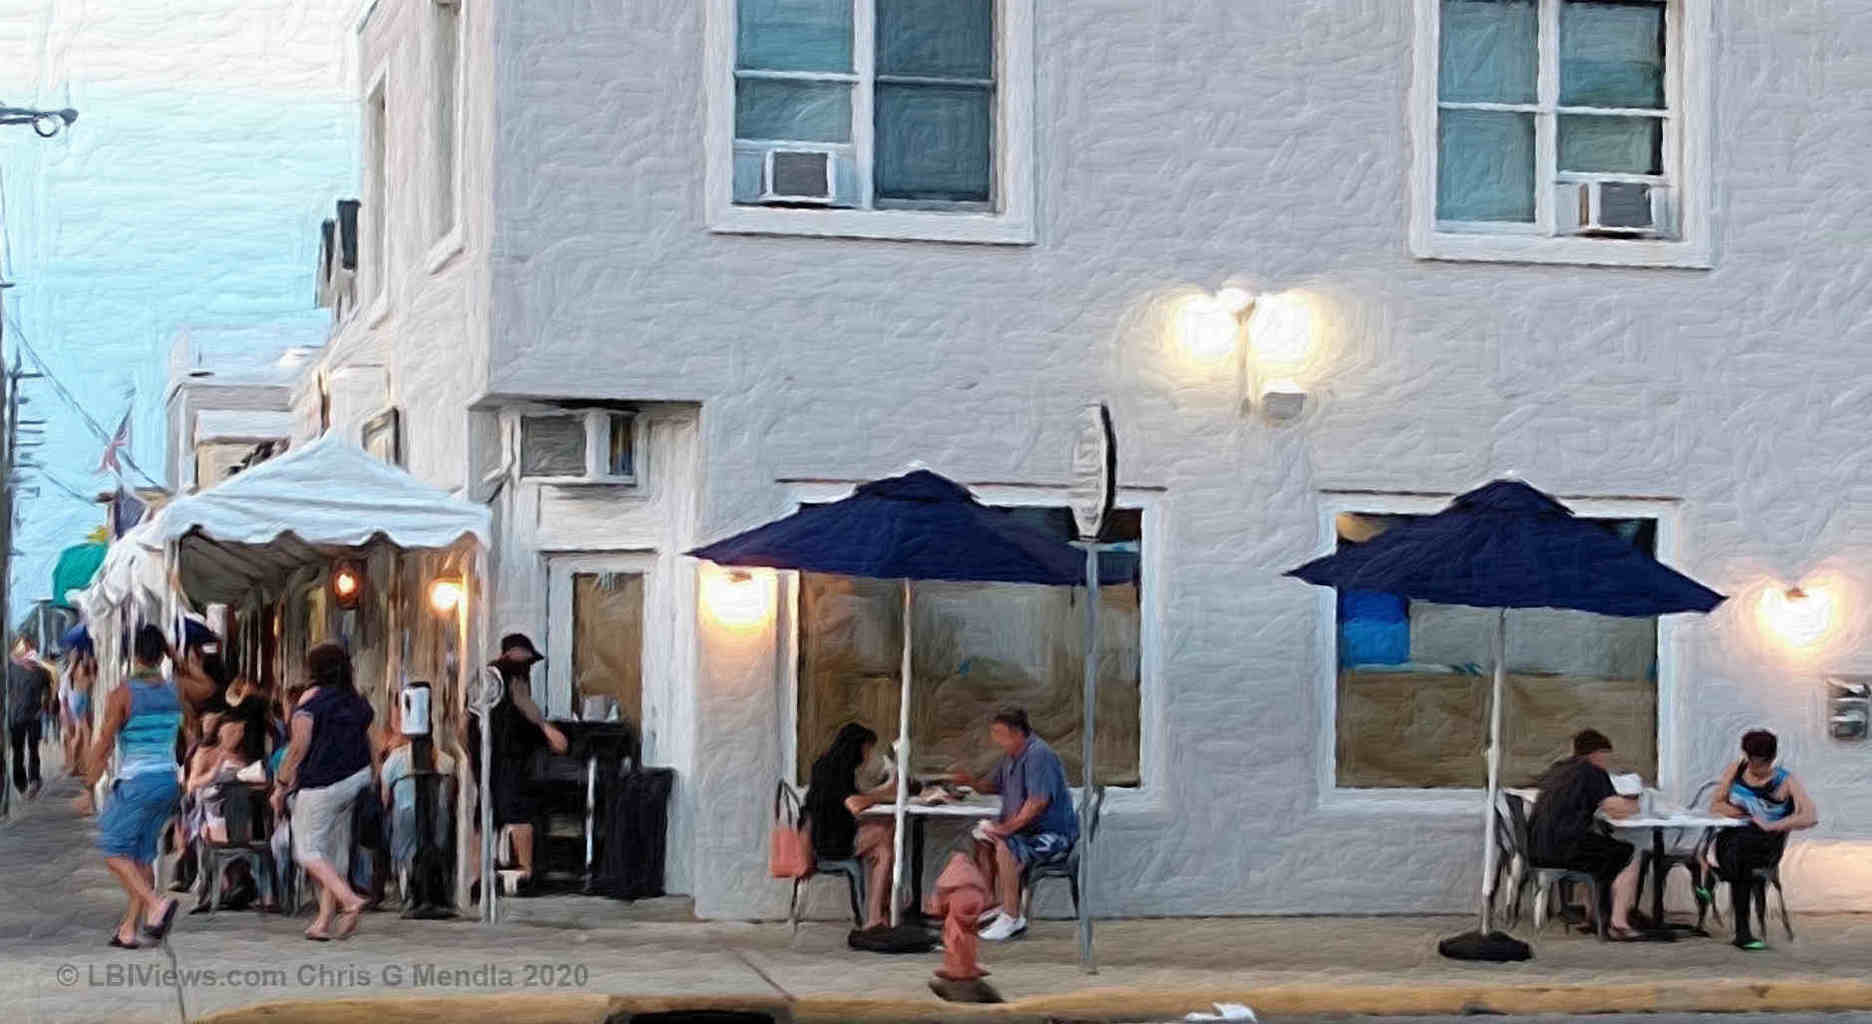 The Chicken or the Egg - Sidewalk Dining - Beach Haven, NJ on LBI